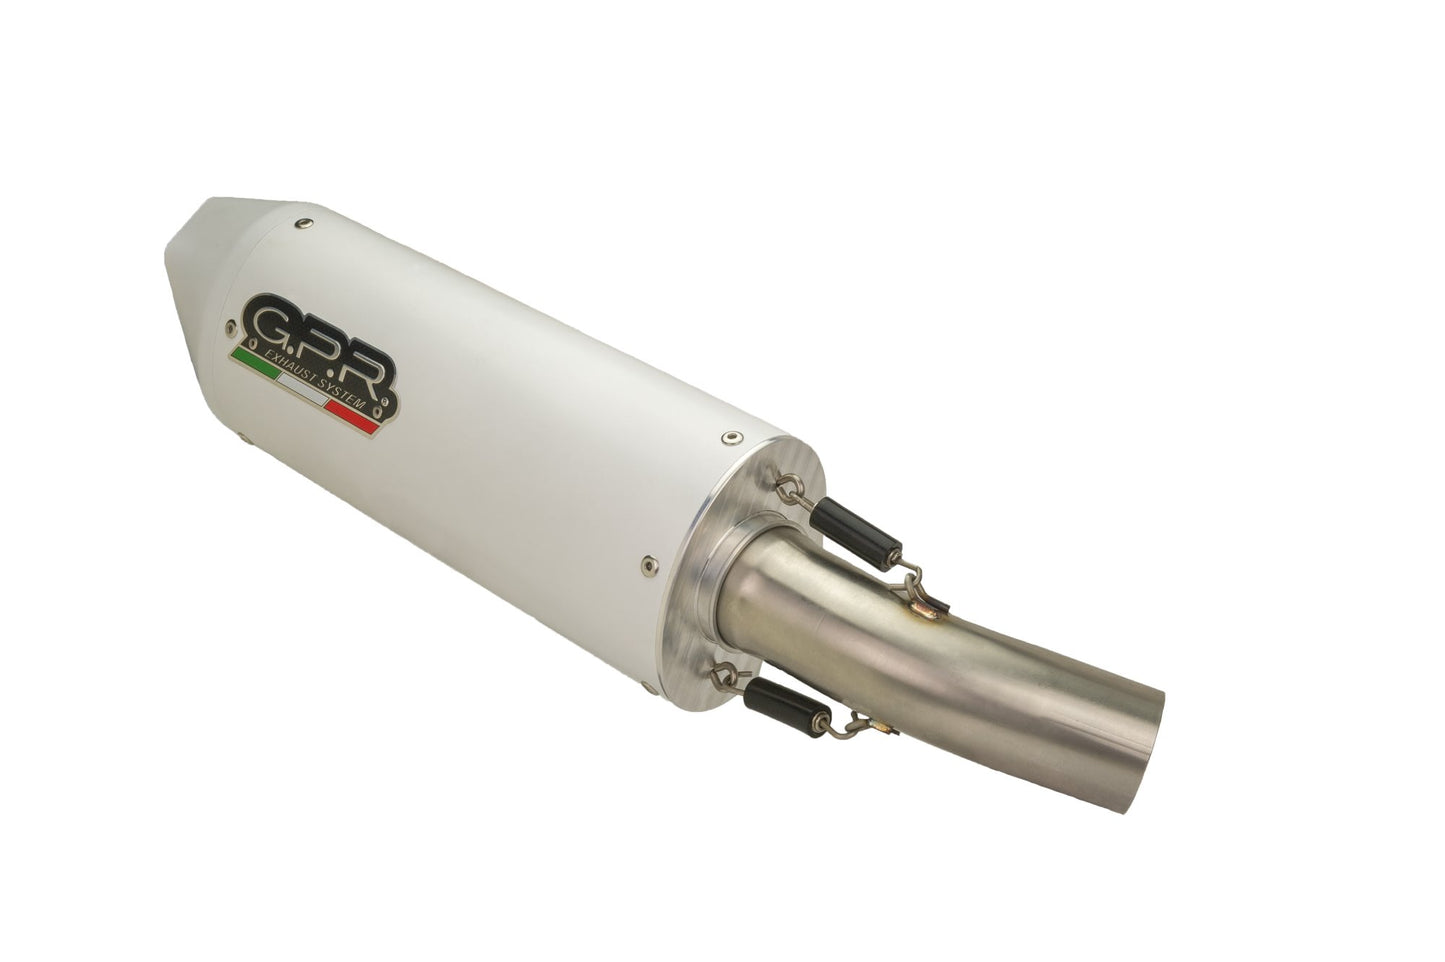 GPR Exhaust System Husqvarna Enduro 701 2015-2016, Albus Ceramic, Slip-on Exhaust Including Removable DB Killer and Link Pipe